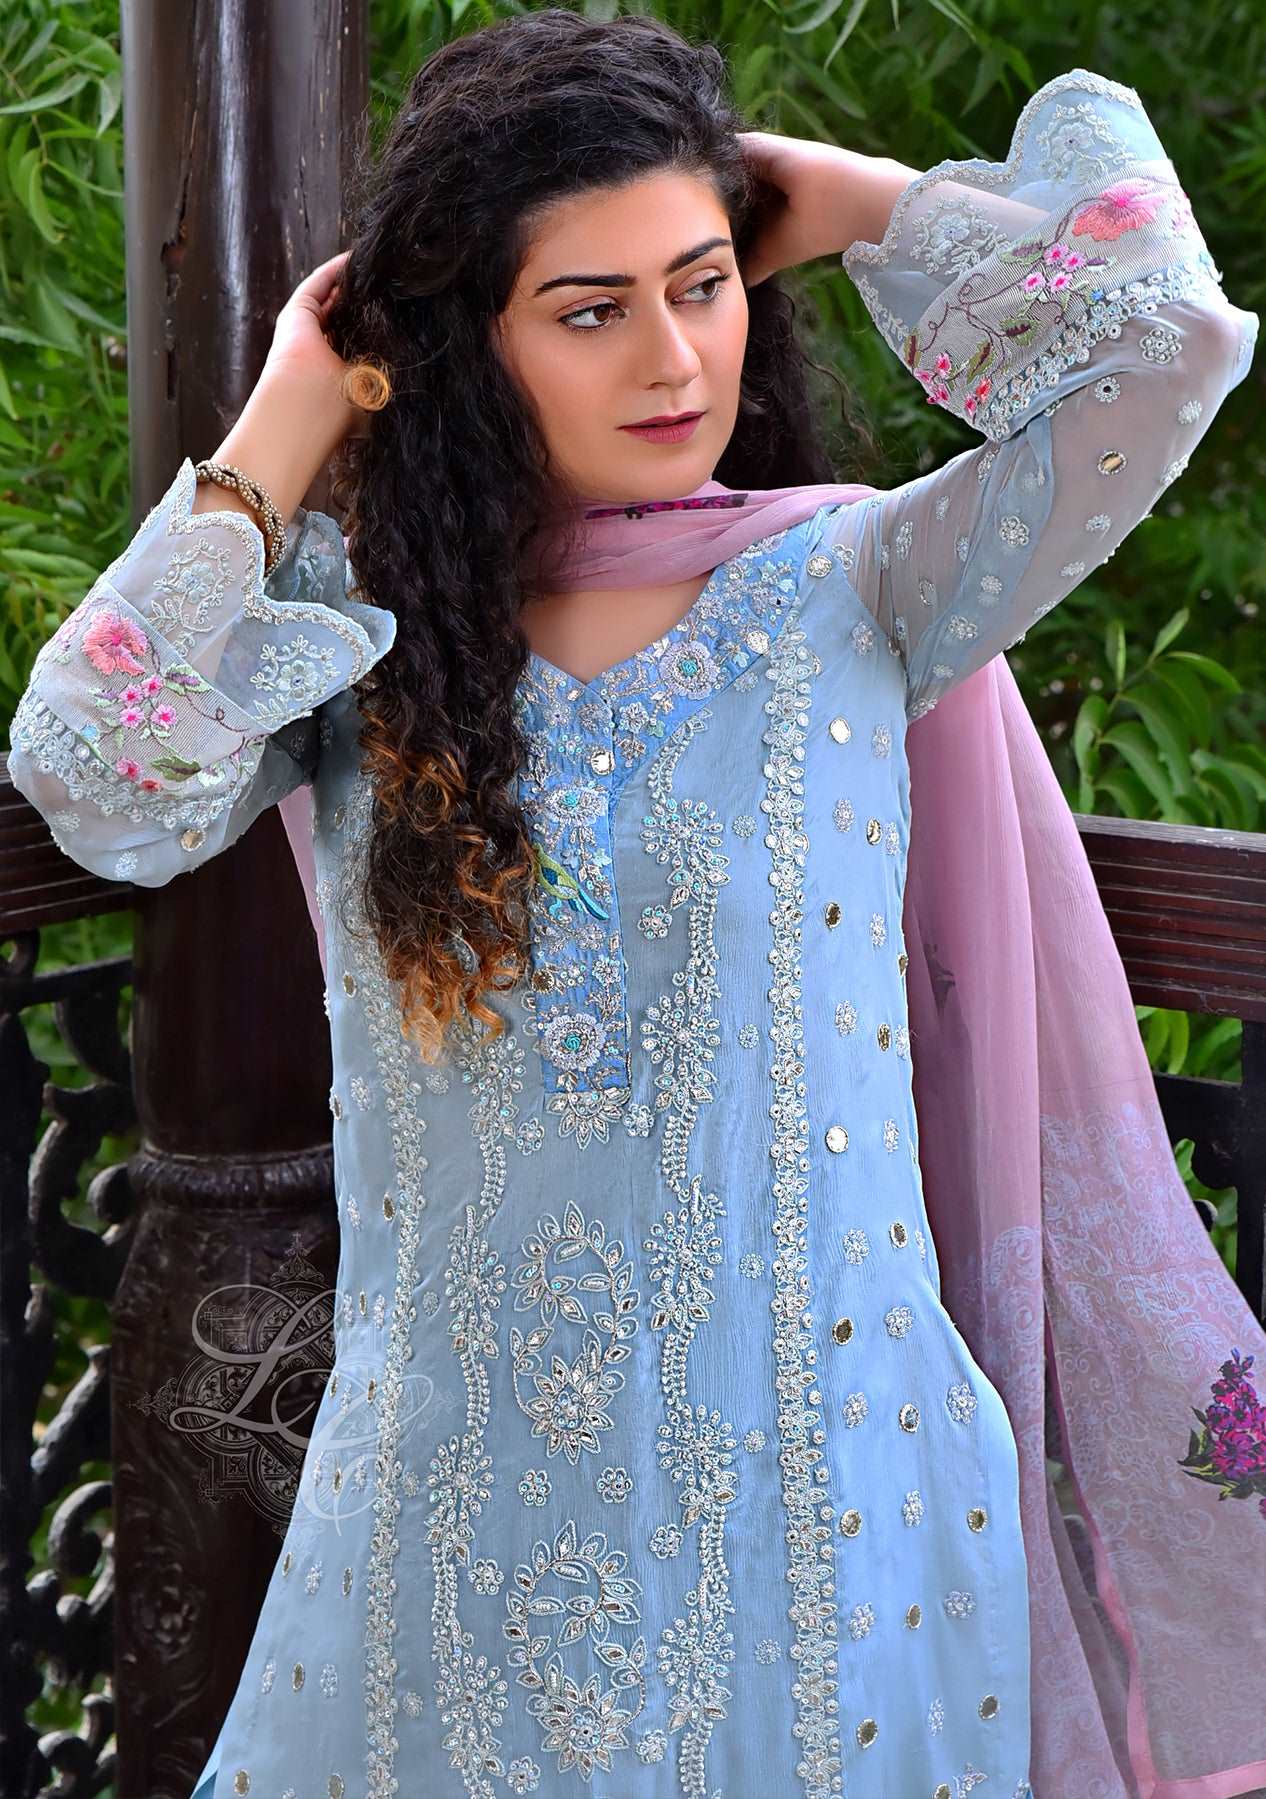 Blue gota work shirt paired with a shalwar and printed dupatta